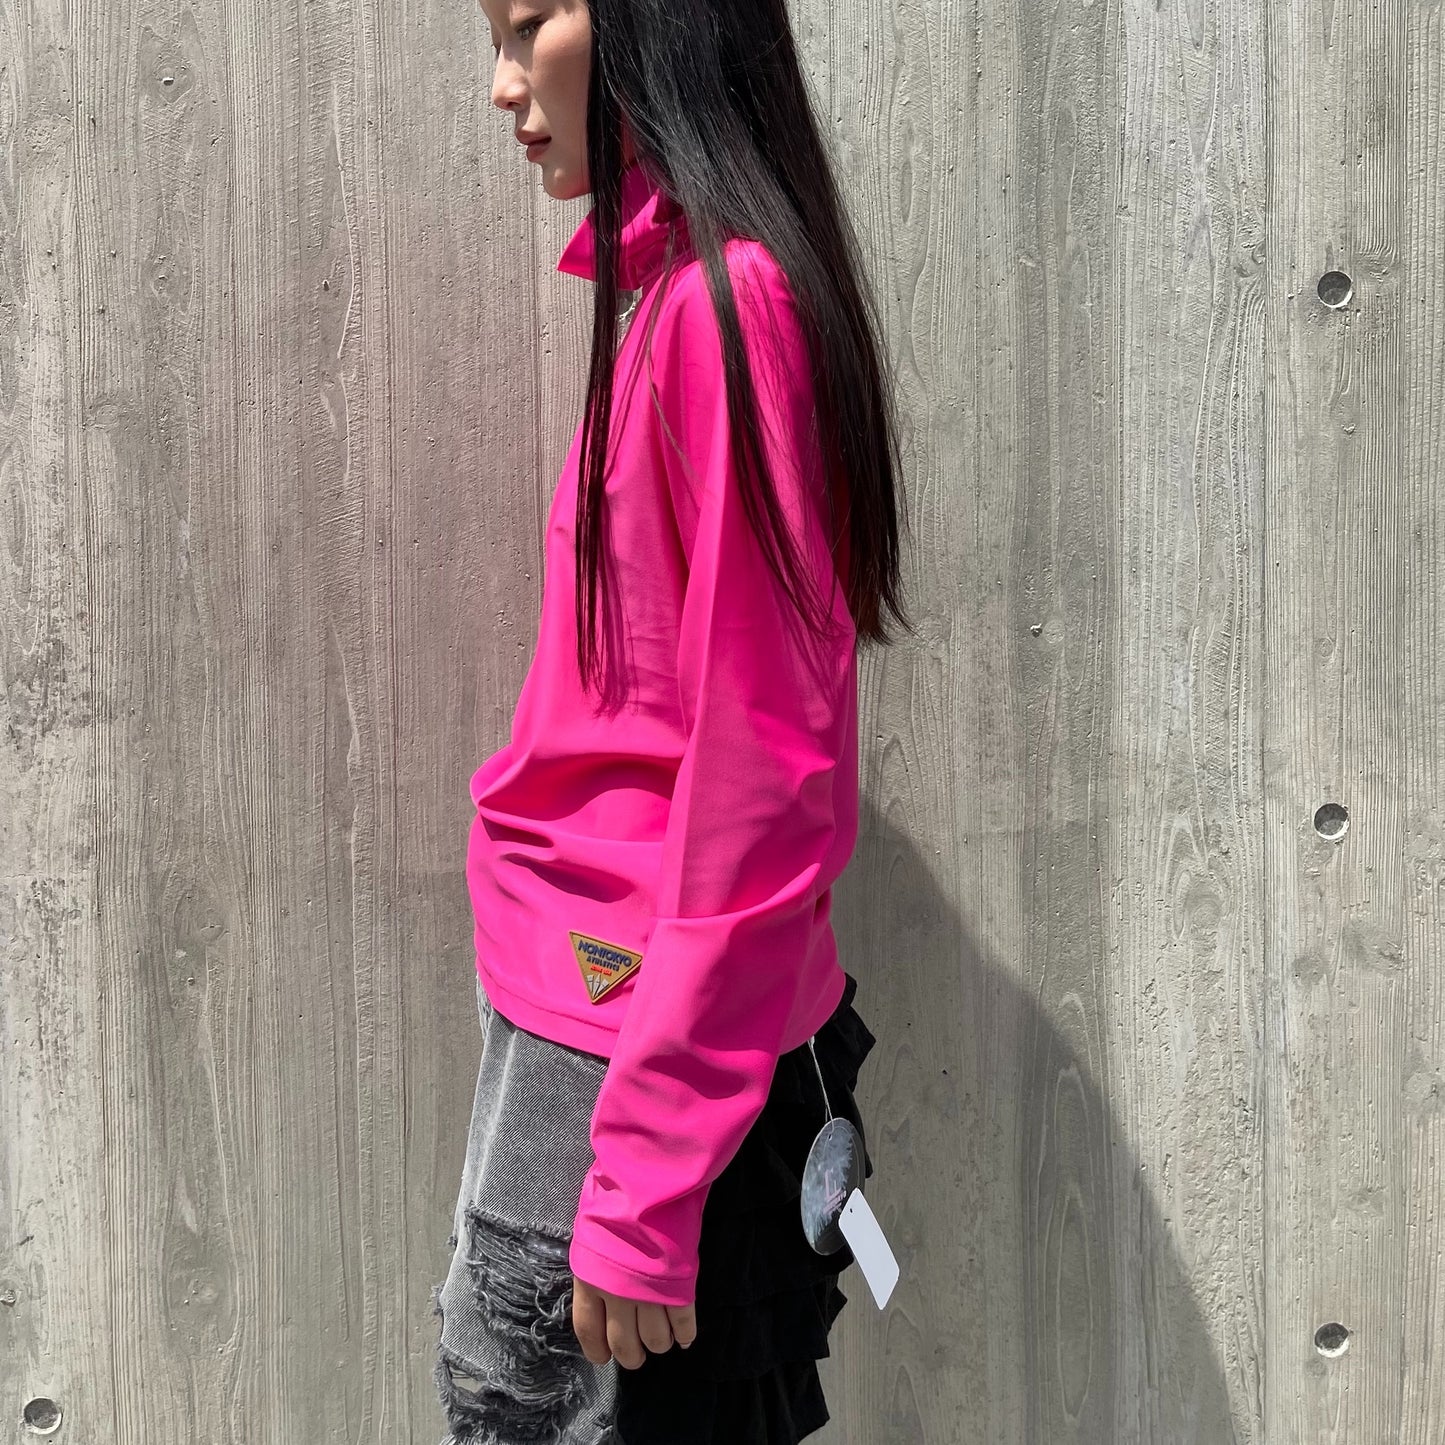 NON TOKYO / STRETCH HI-NECK CUT AND SEWN / PINK / ストレッチ